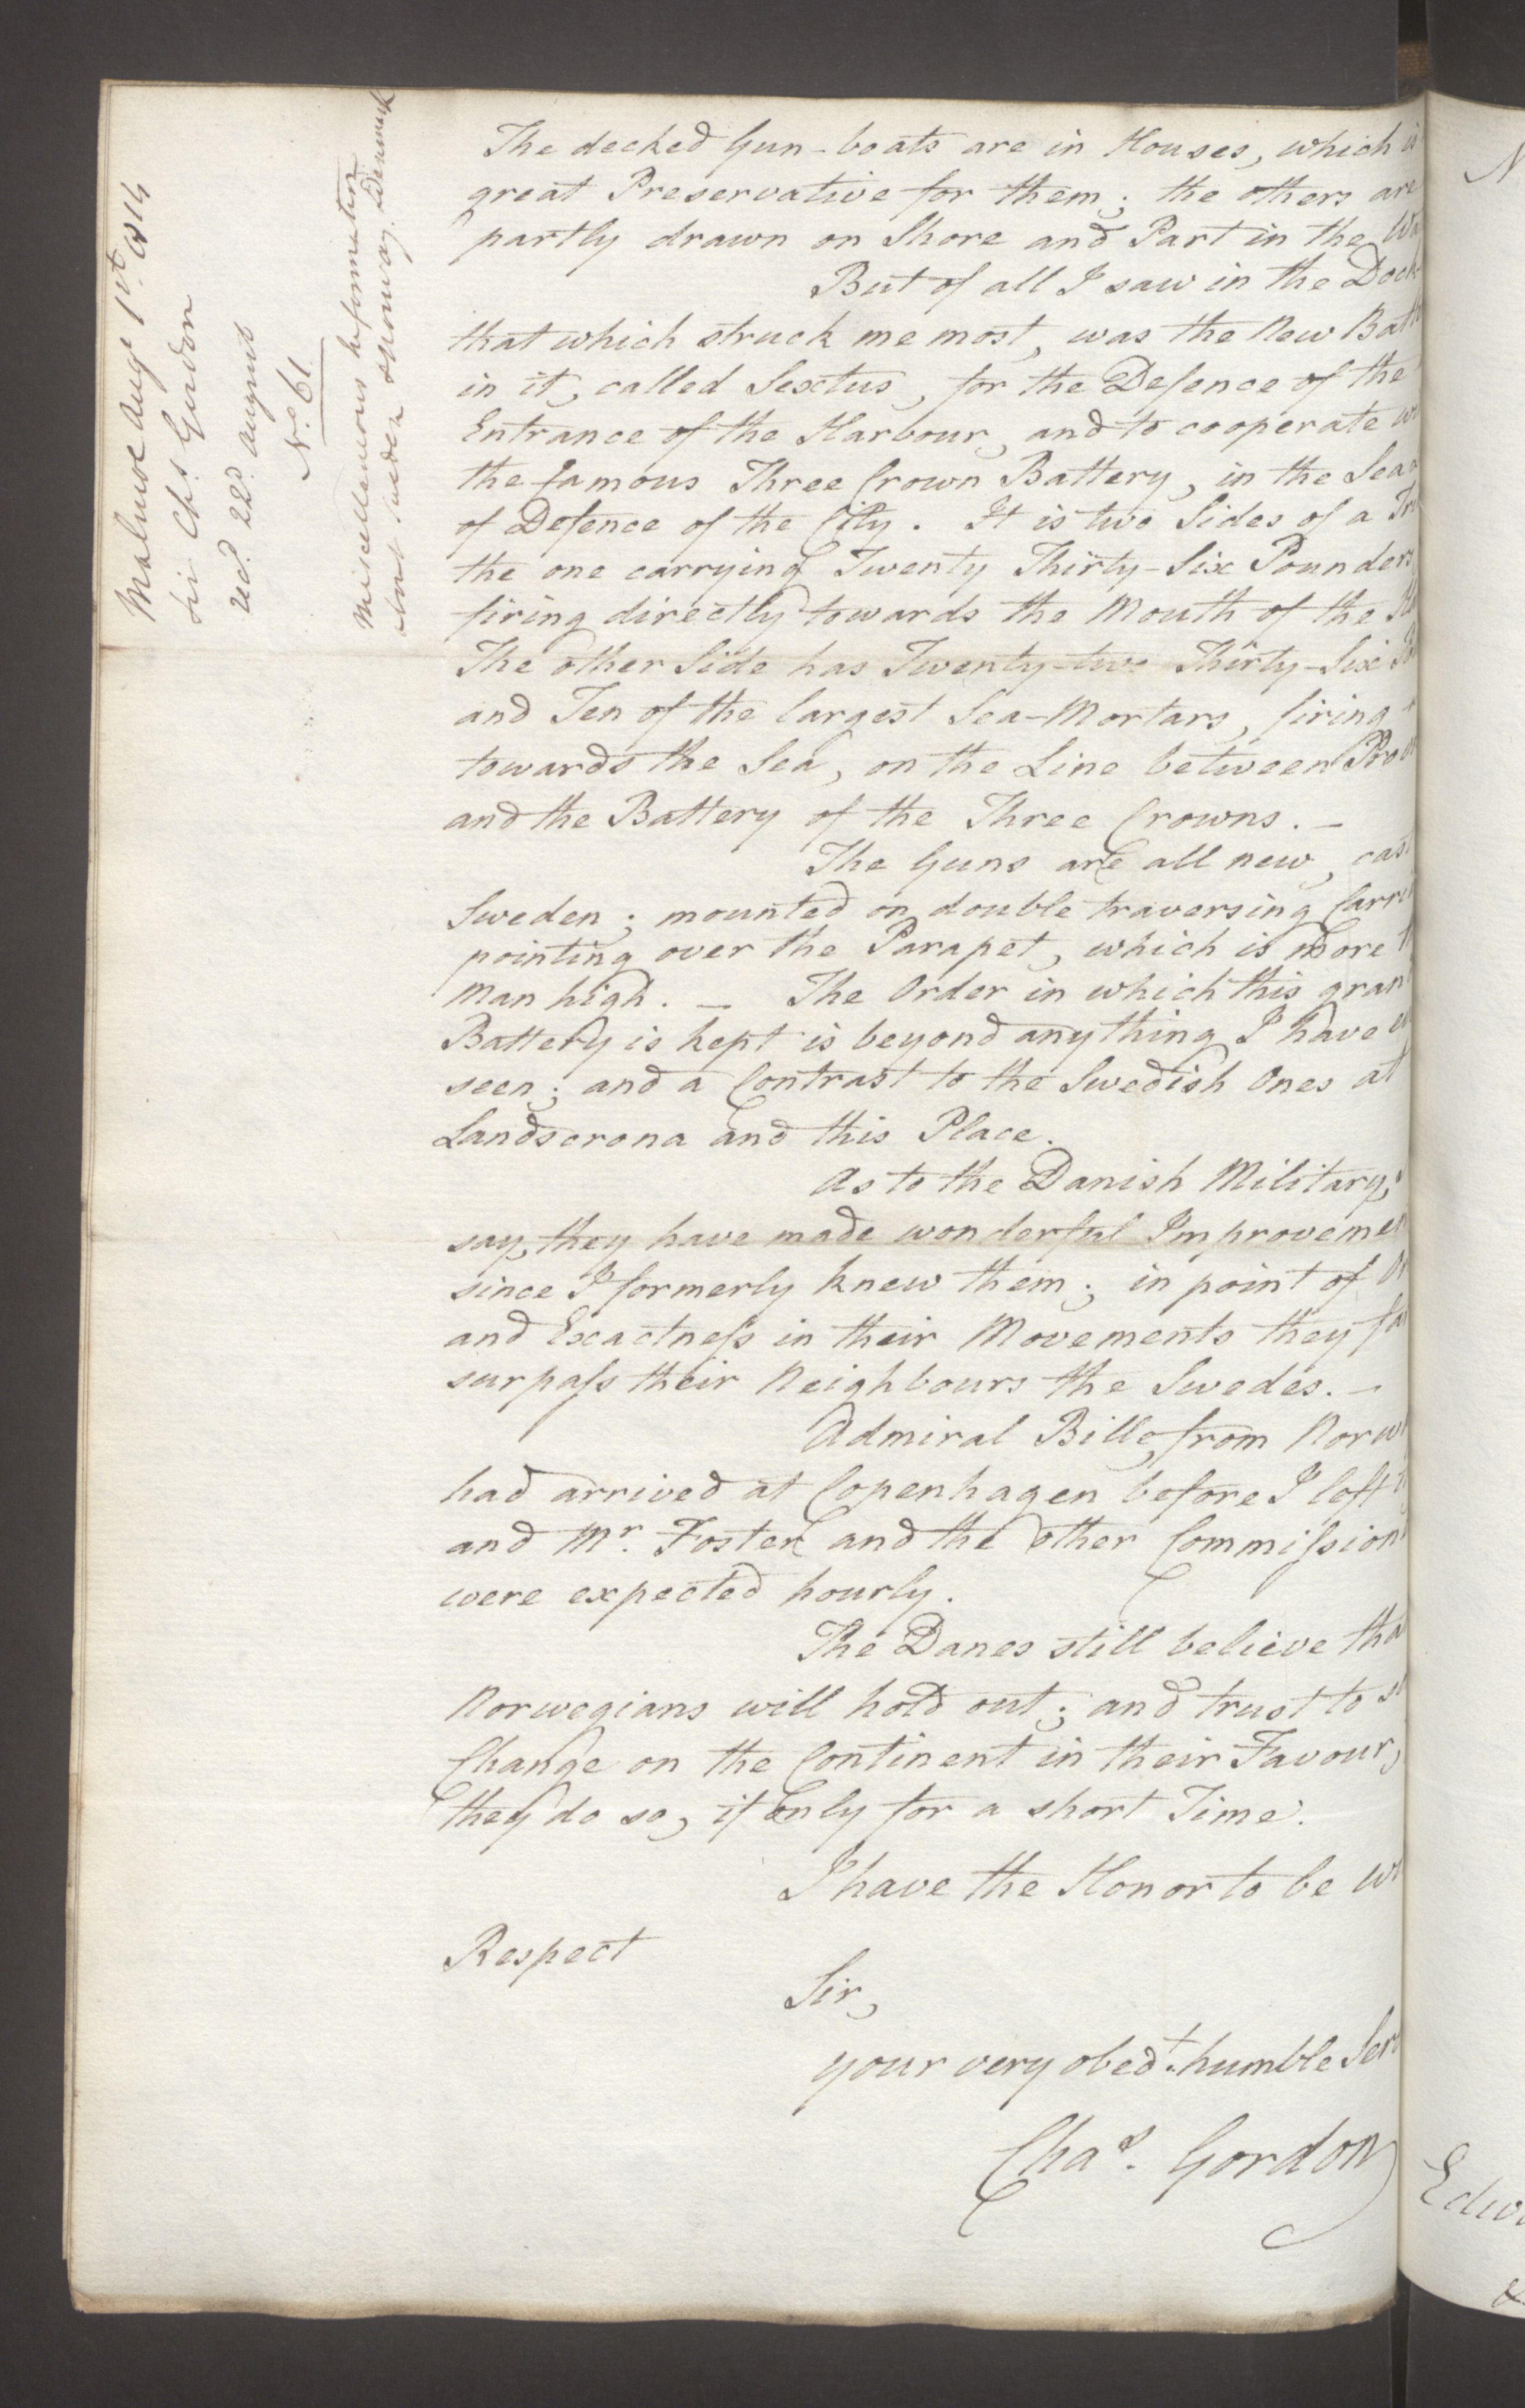 Foreign Office*, UKA/-/FO 38/16: Sir C. Gordon. Reports from Malmö, Jonkoping, and Helsingborg, 1814, p. 78